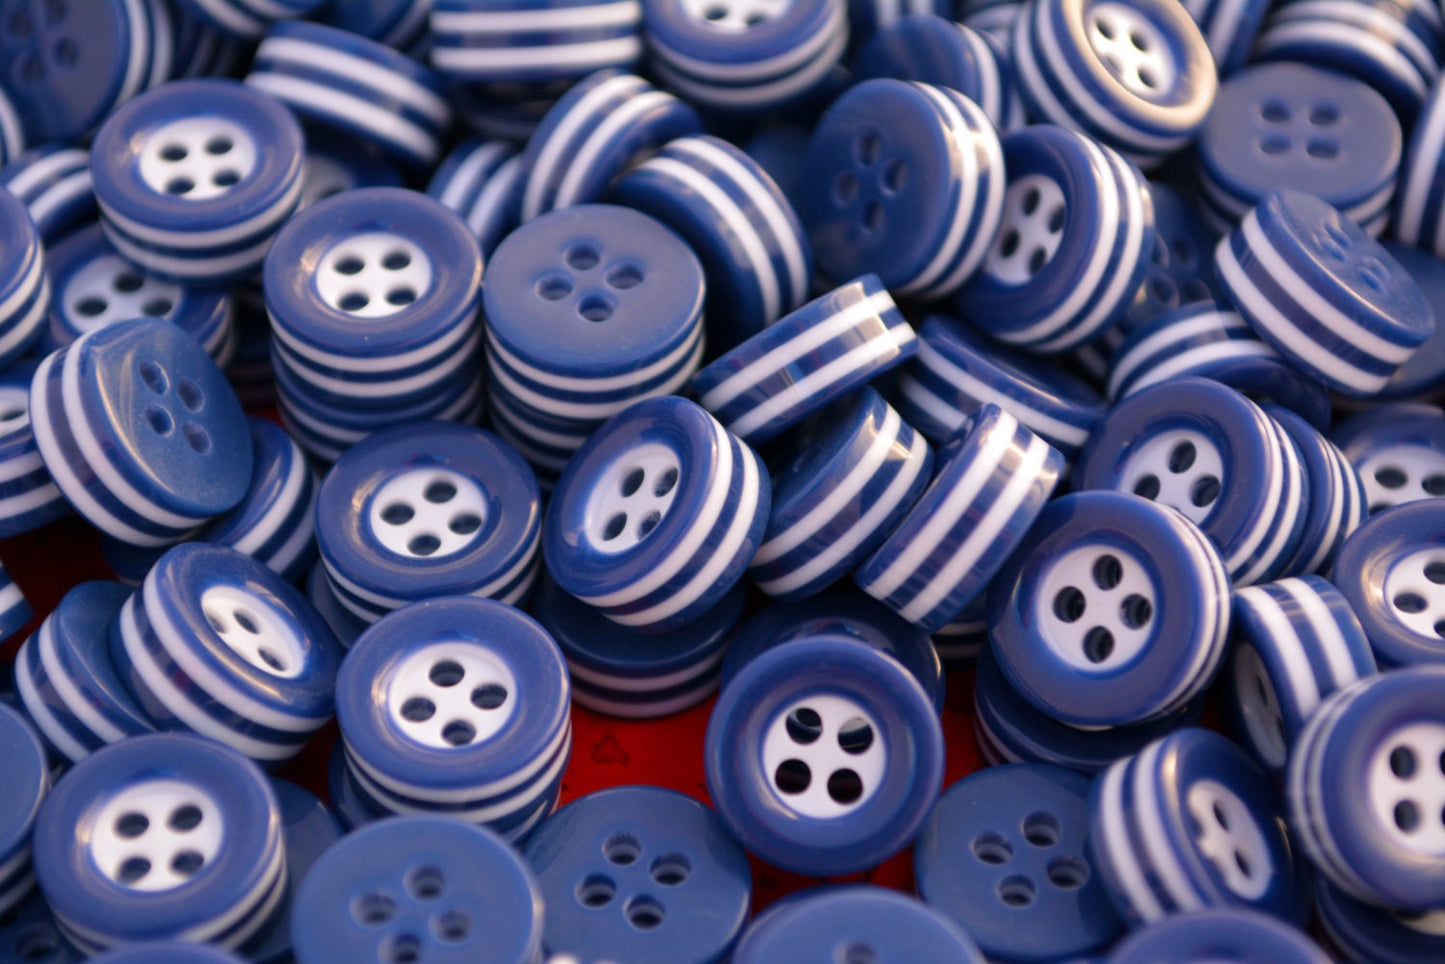 14 white and blue STRIPED BUTTONS for 1 complete shirt - 5mm thick! - great quality - Made in ITALY